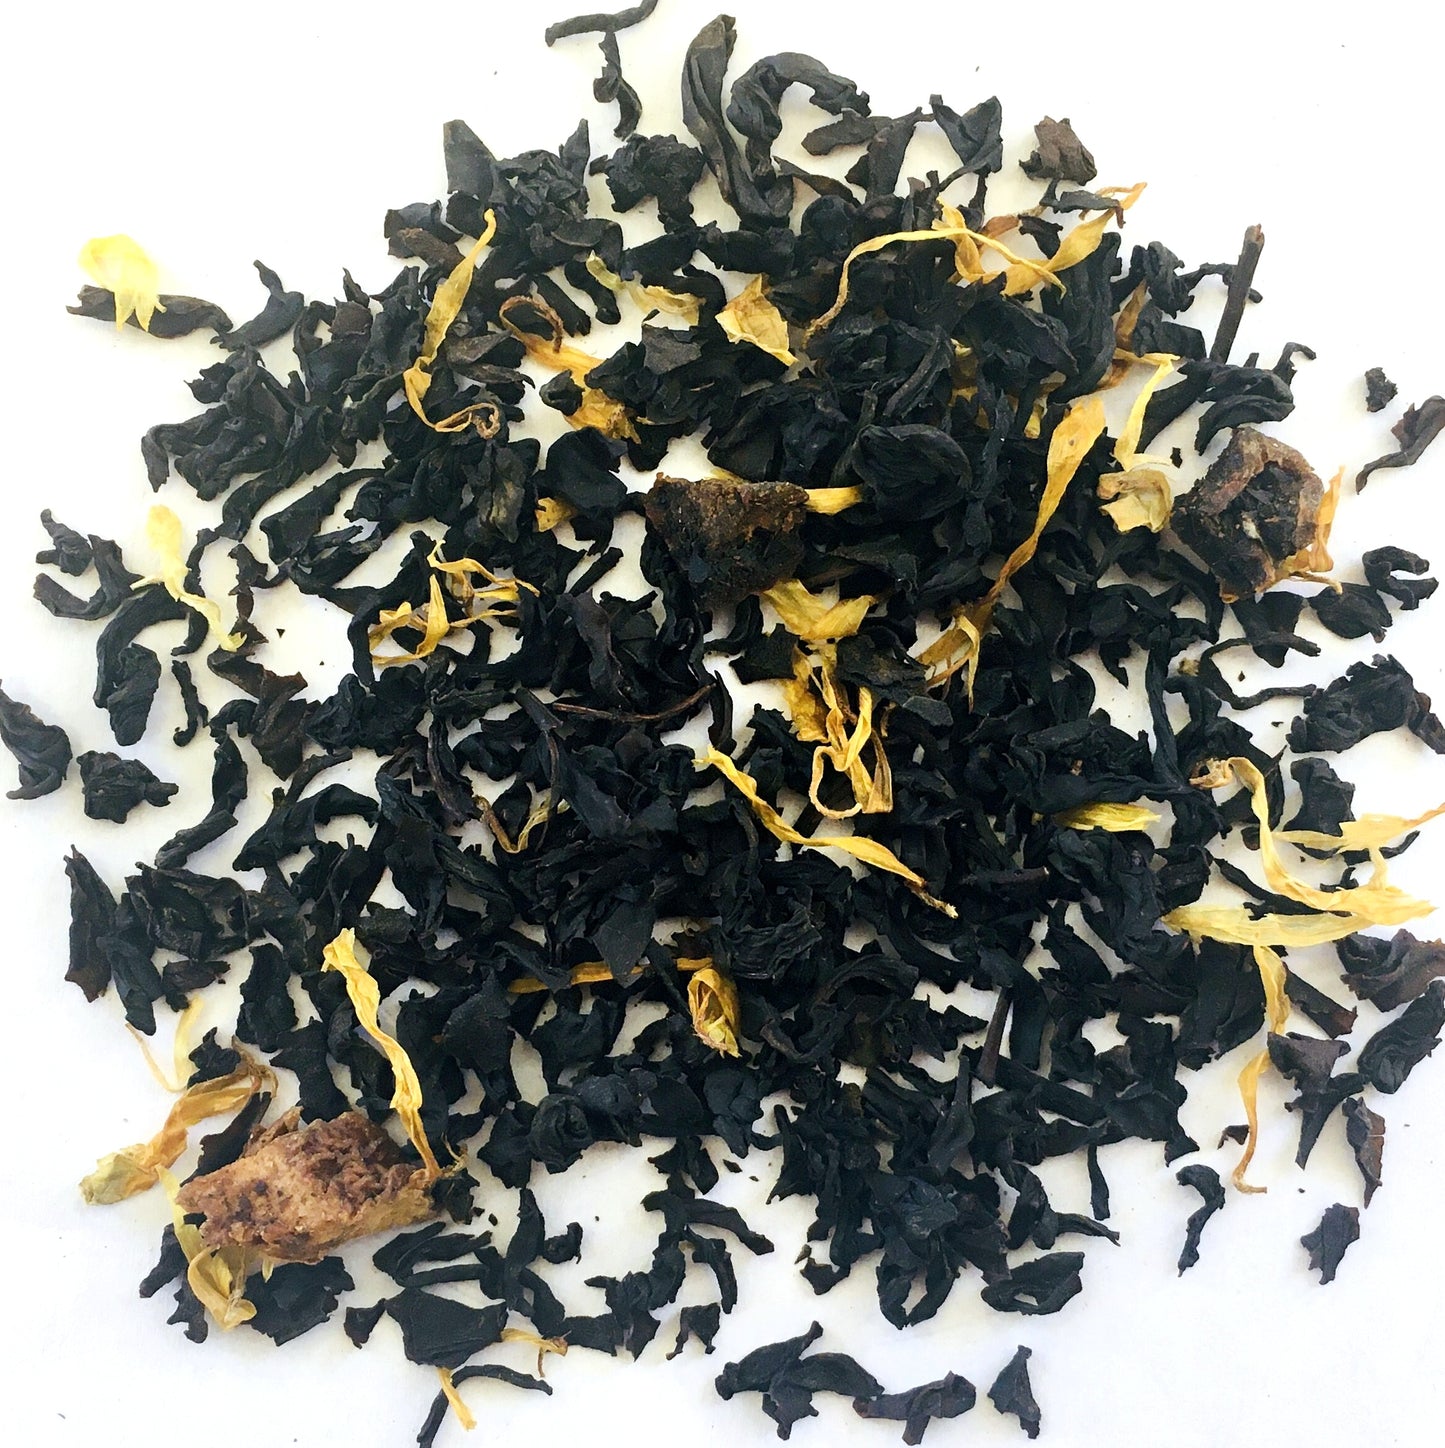 BLACK TEA, PEACH APRICOT FLAVORING, FRUIT BITS AND YELLOW FLOWERS